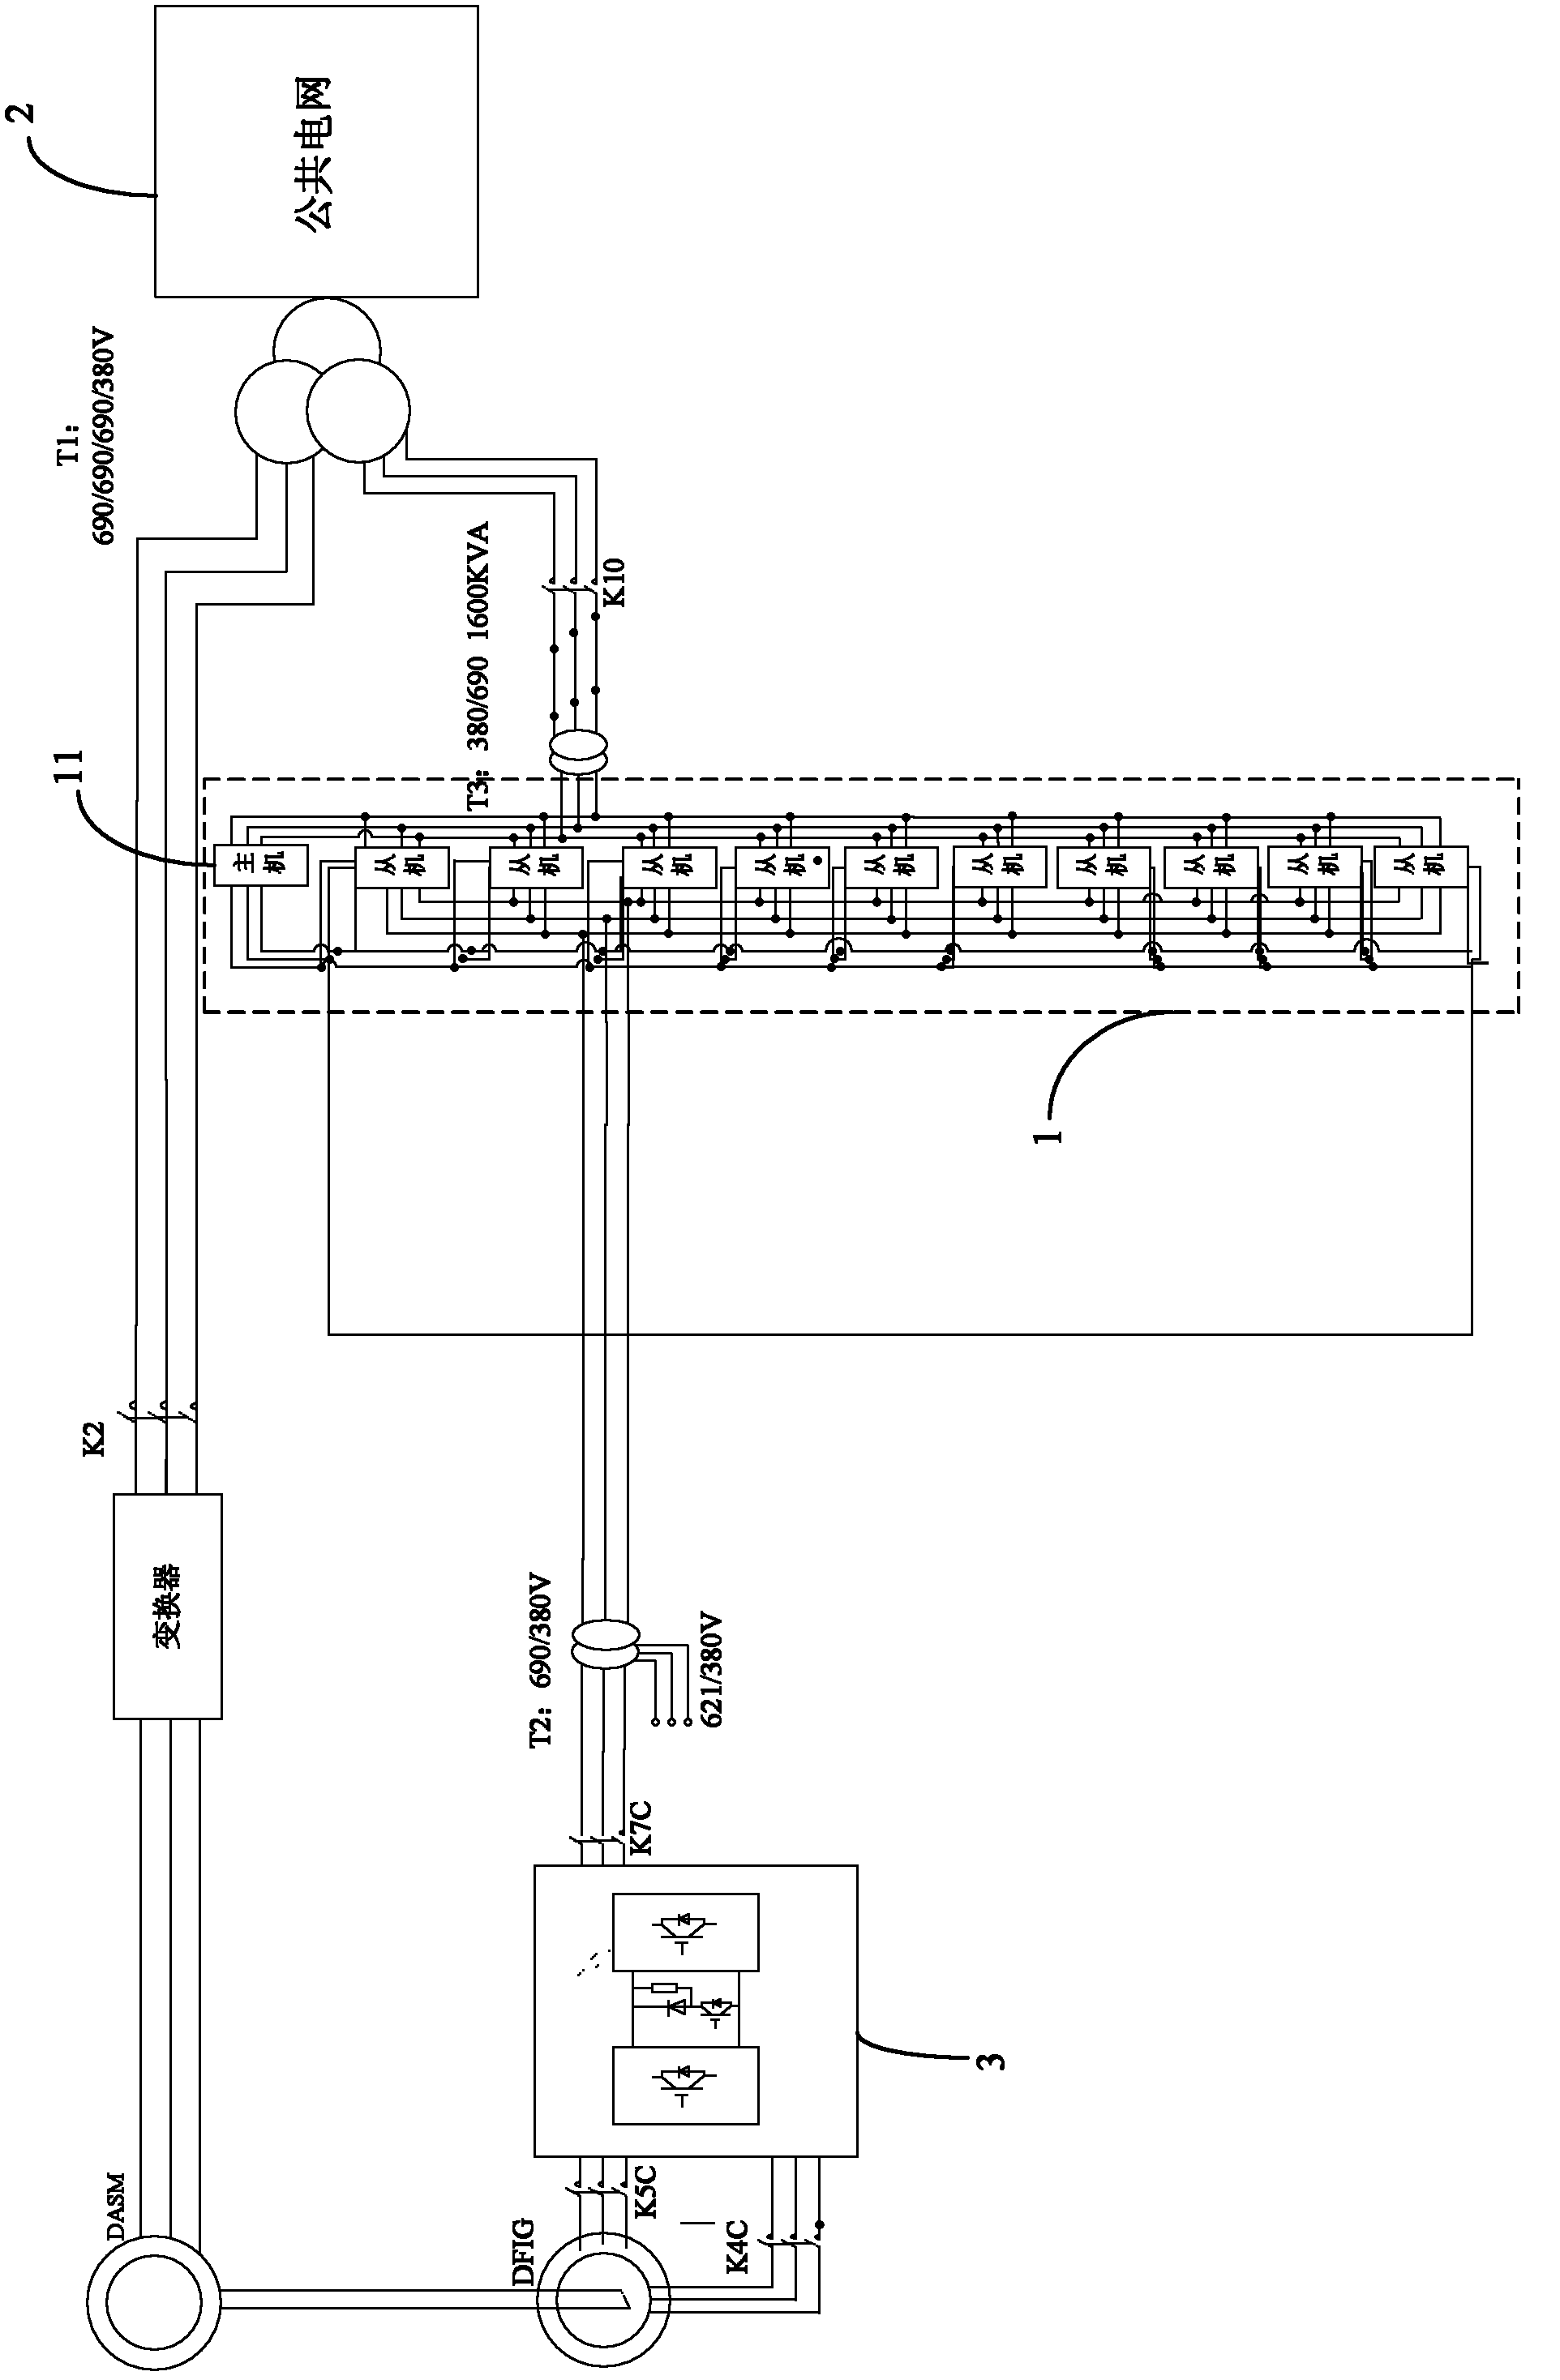 Online test system, device and method of wind power generation equipment